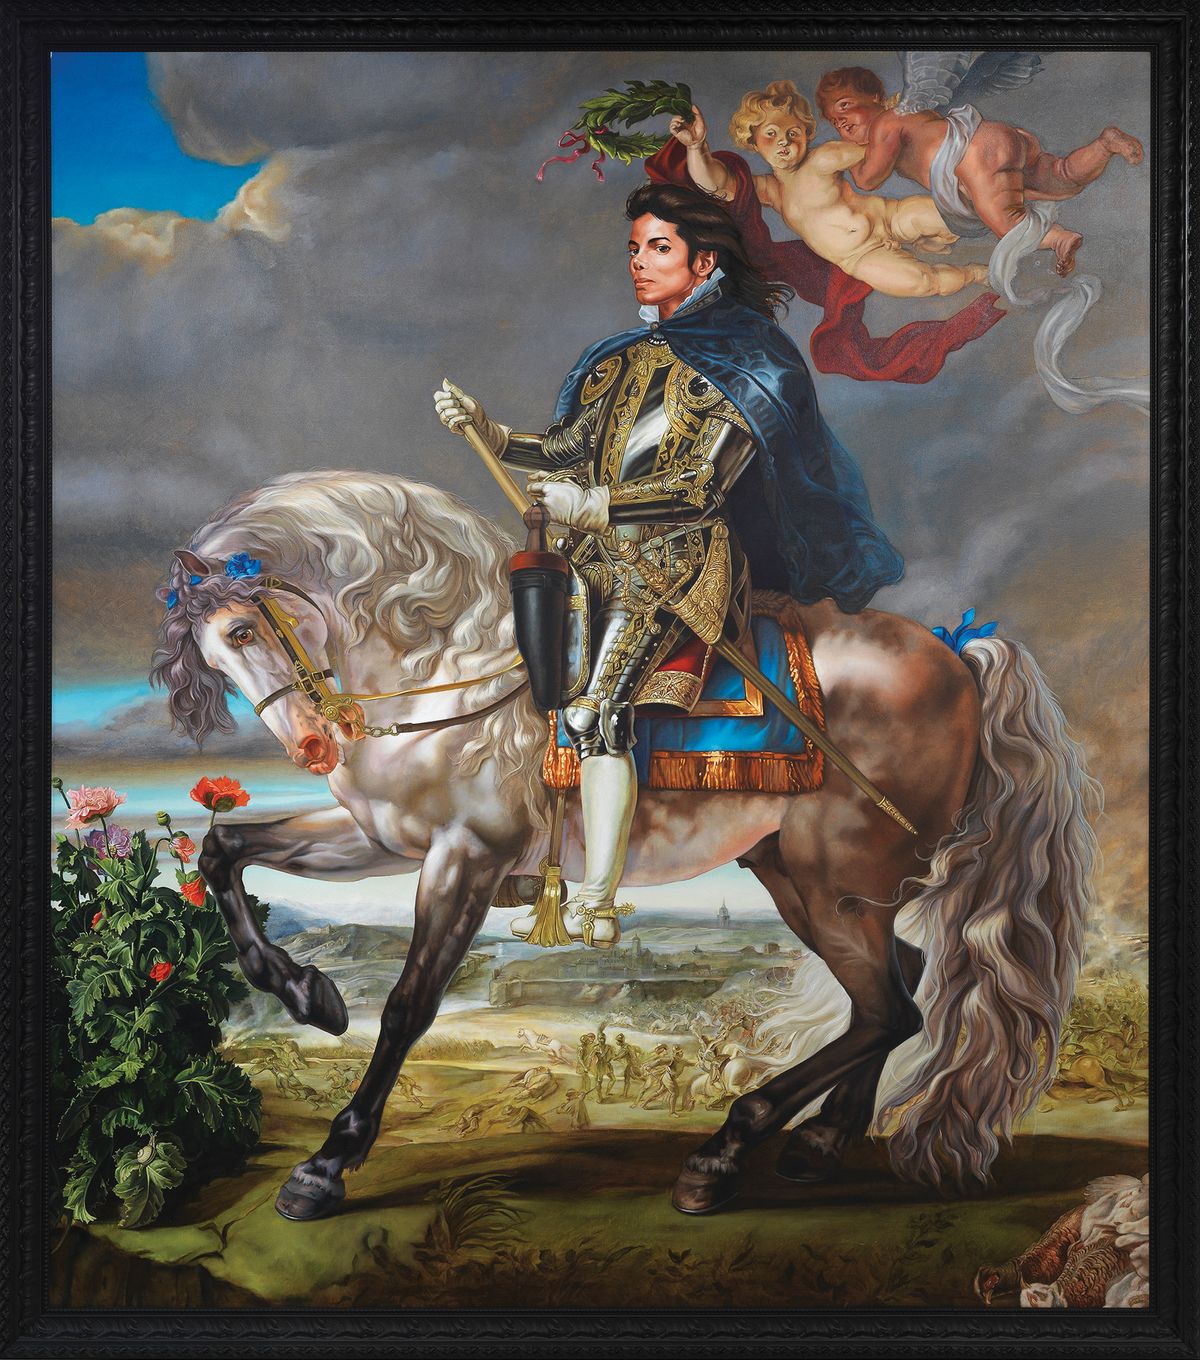 Kehinde Wiley’s Equestrian Portrait of King Philip II (Michael Jackson) (2010) Kehinde Wiley; Olbricht Collection; Photo: Jeurg Iseler; Courtesy of Stephen Friedman Gallery and Sean Kelly Gallery